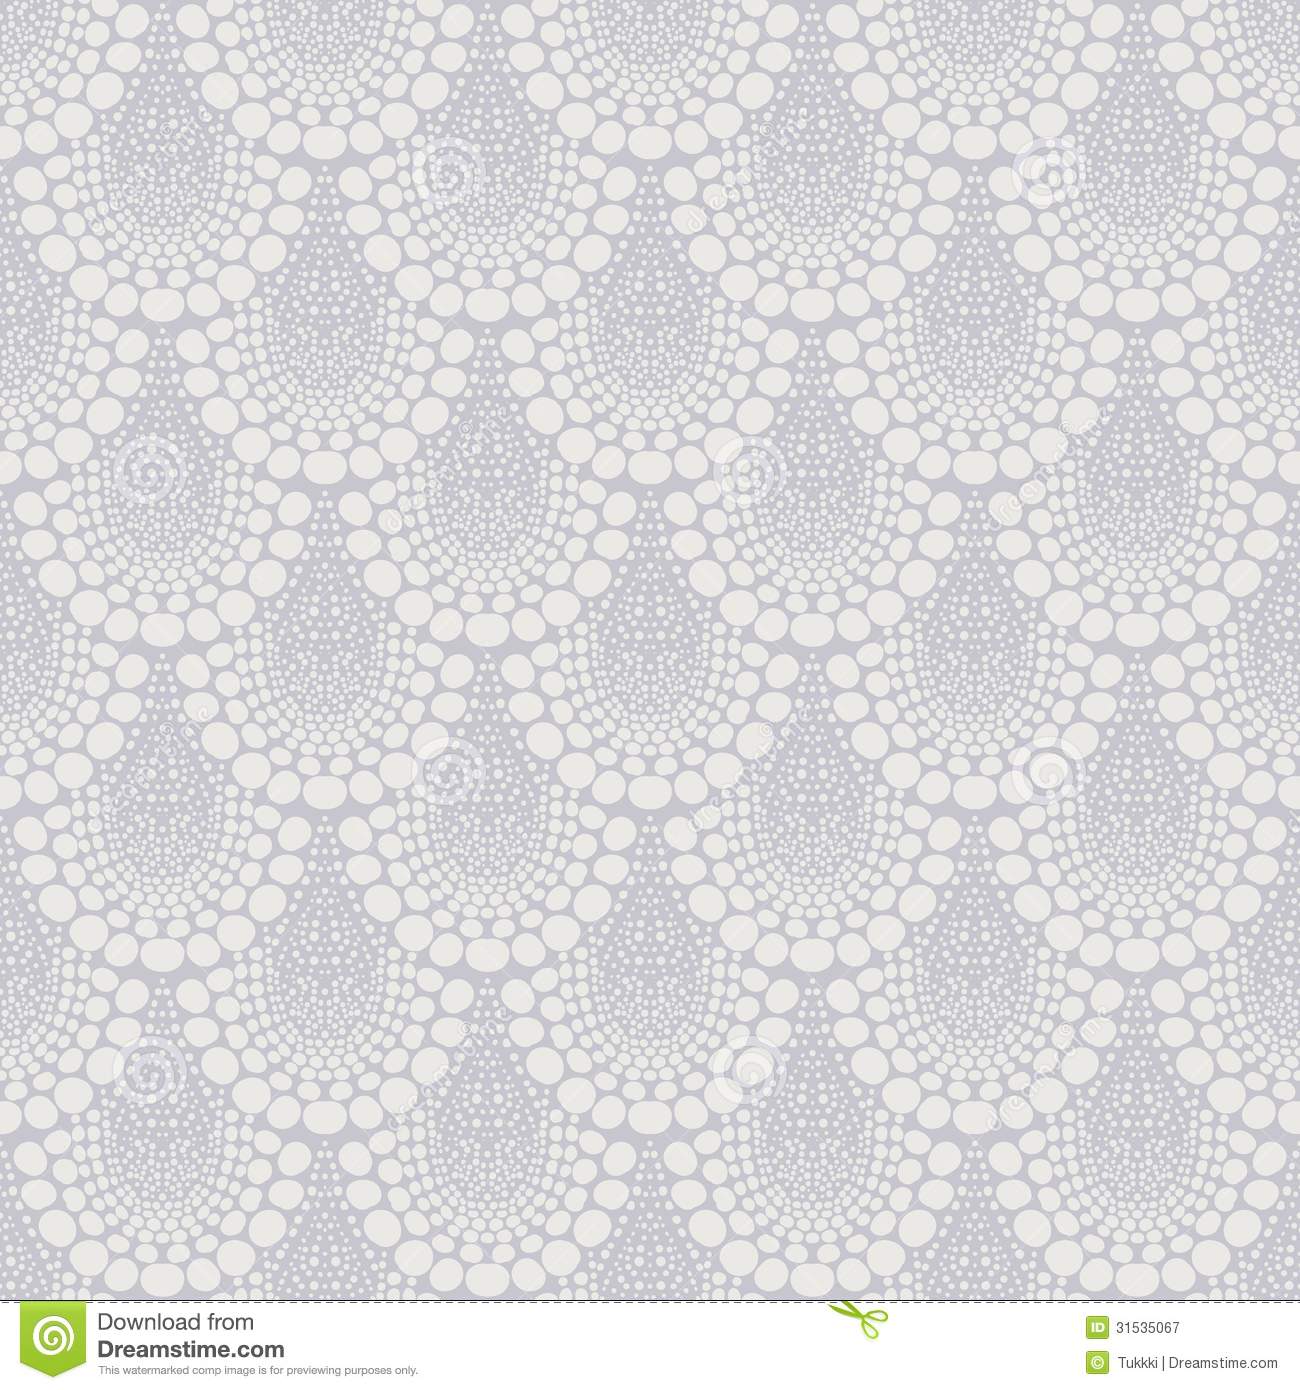  and white damask wallpaperfall wallpaper   DriverLayer Search Engine